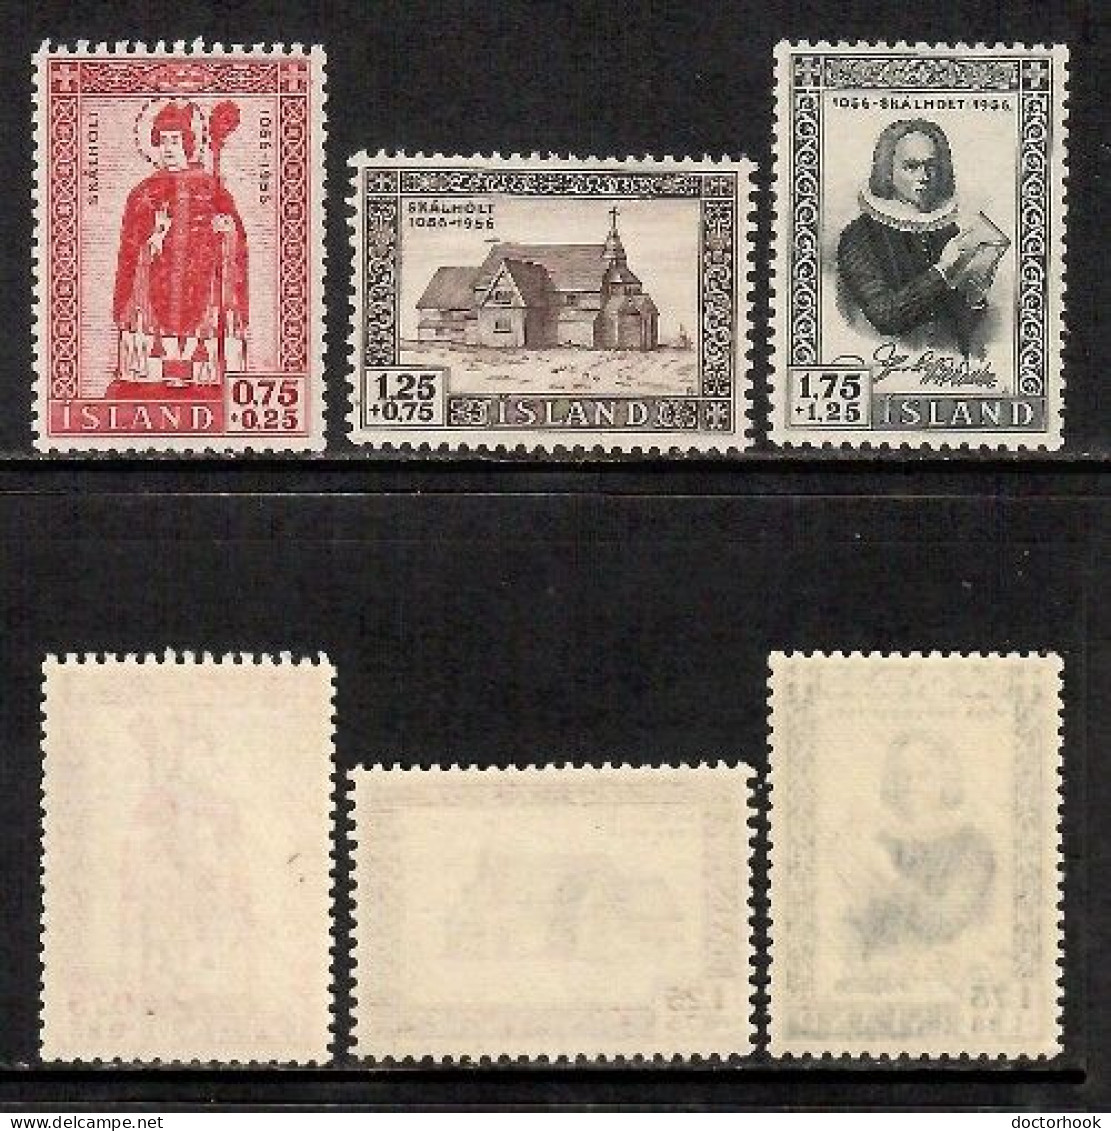 ICELAND   Scott # B 14-6** MINT NH (CONDITION AS PER SCAN) (Stamp Scan # 996-9) - Nuevos